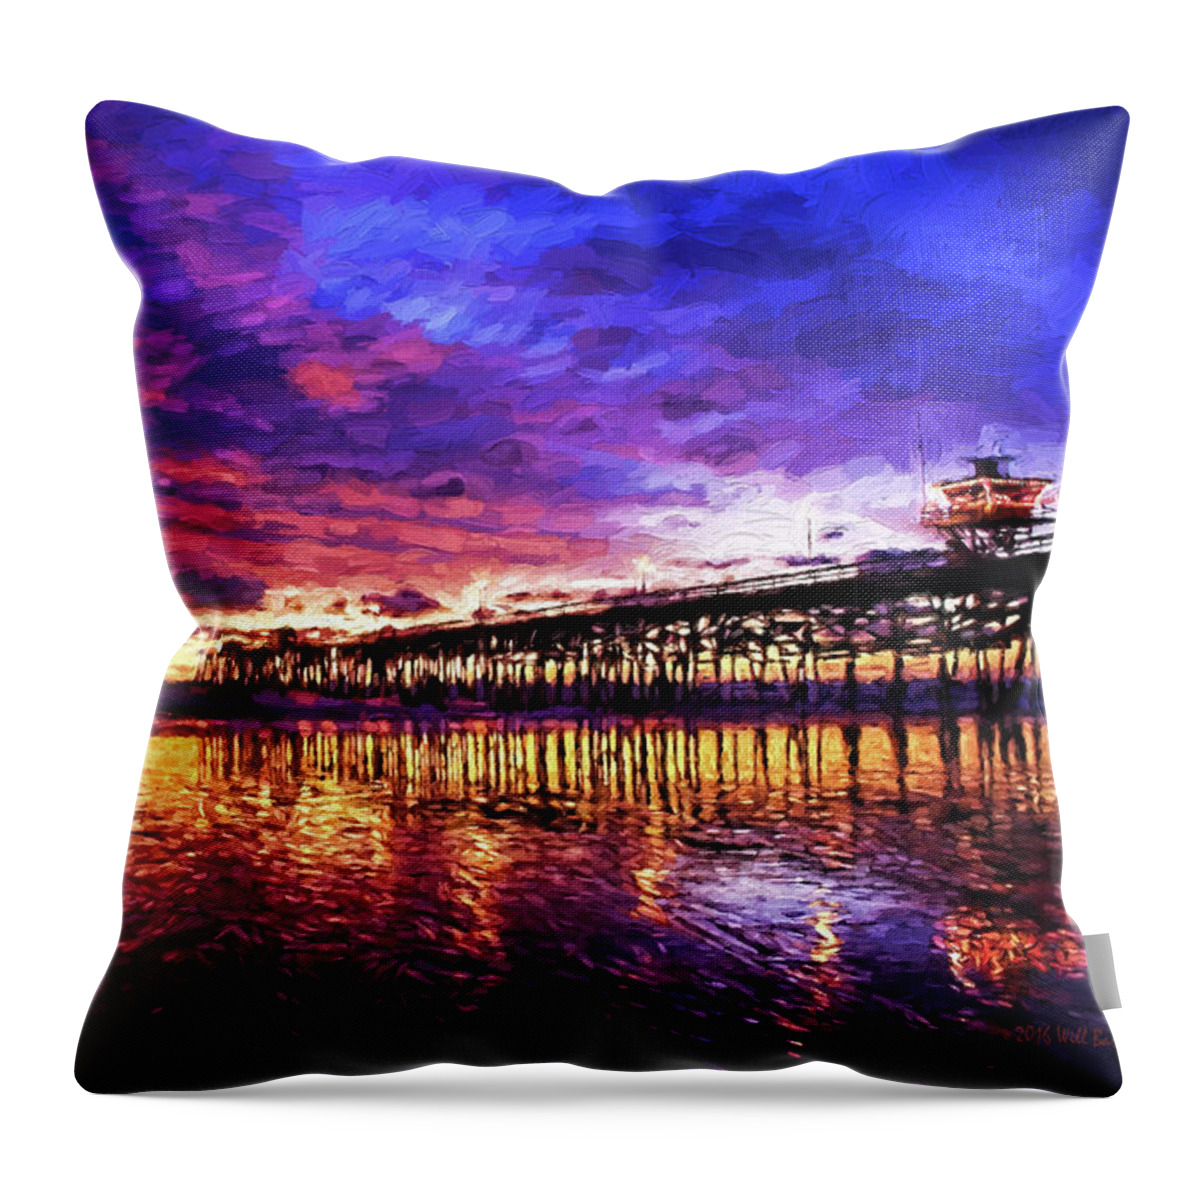 Sunset Throw Pillow featuring the painting Sunset On San Clemente, Nbr 1C by Will Barger